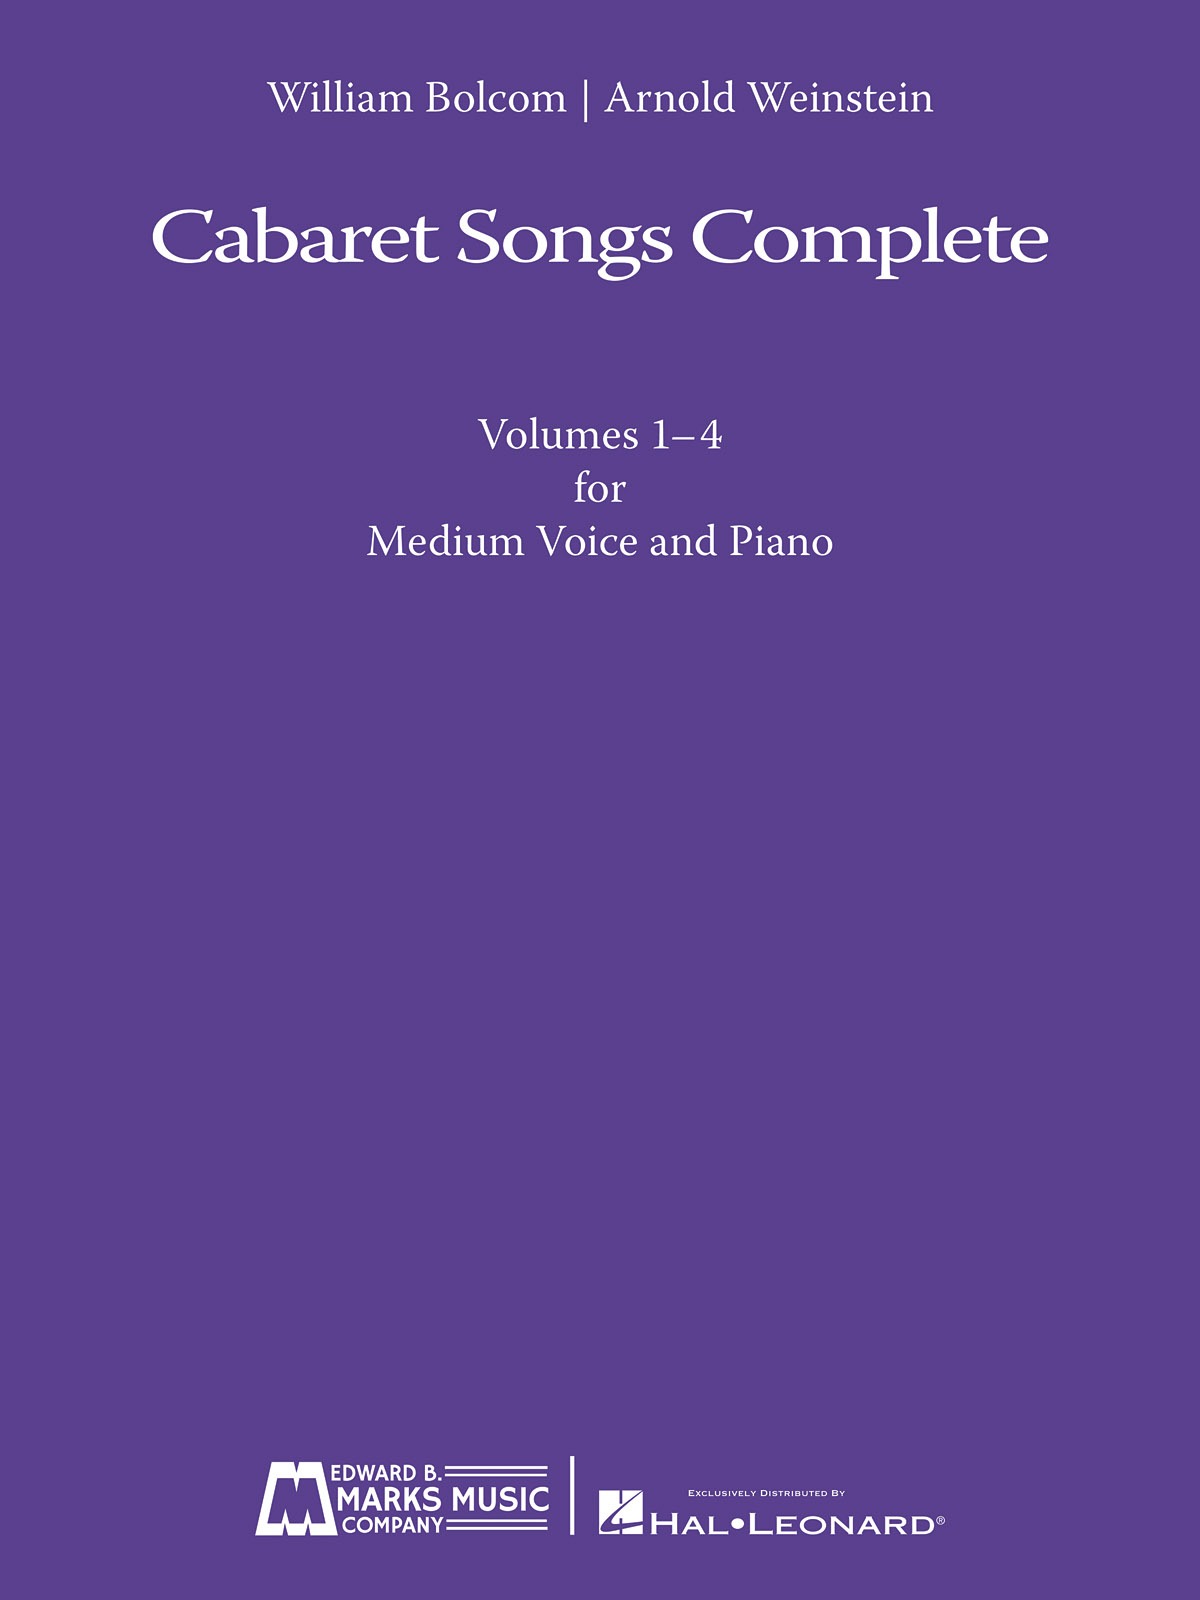 Arnold Weinstein William Bolcom: Cabaret Songs Complete Vol. 1-4: Vocal and